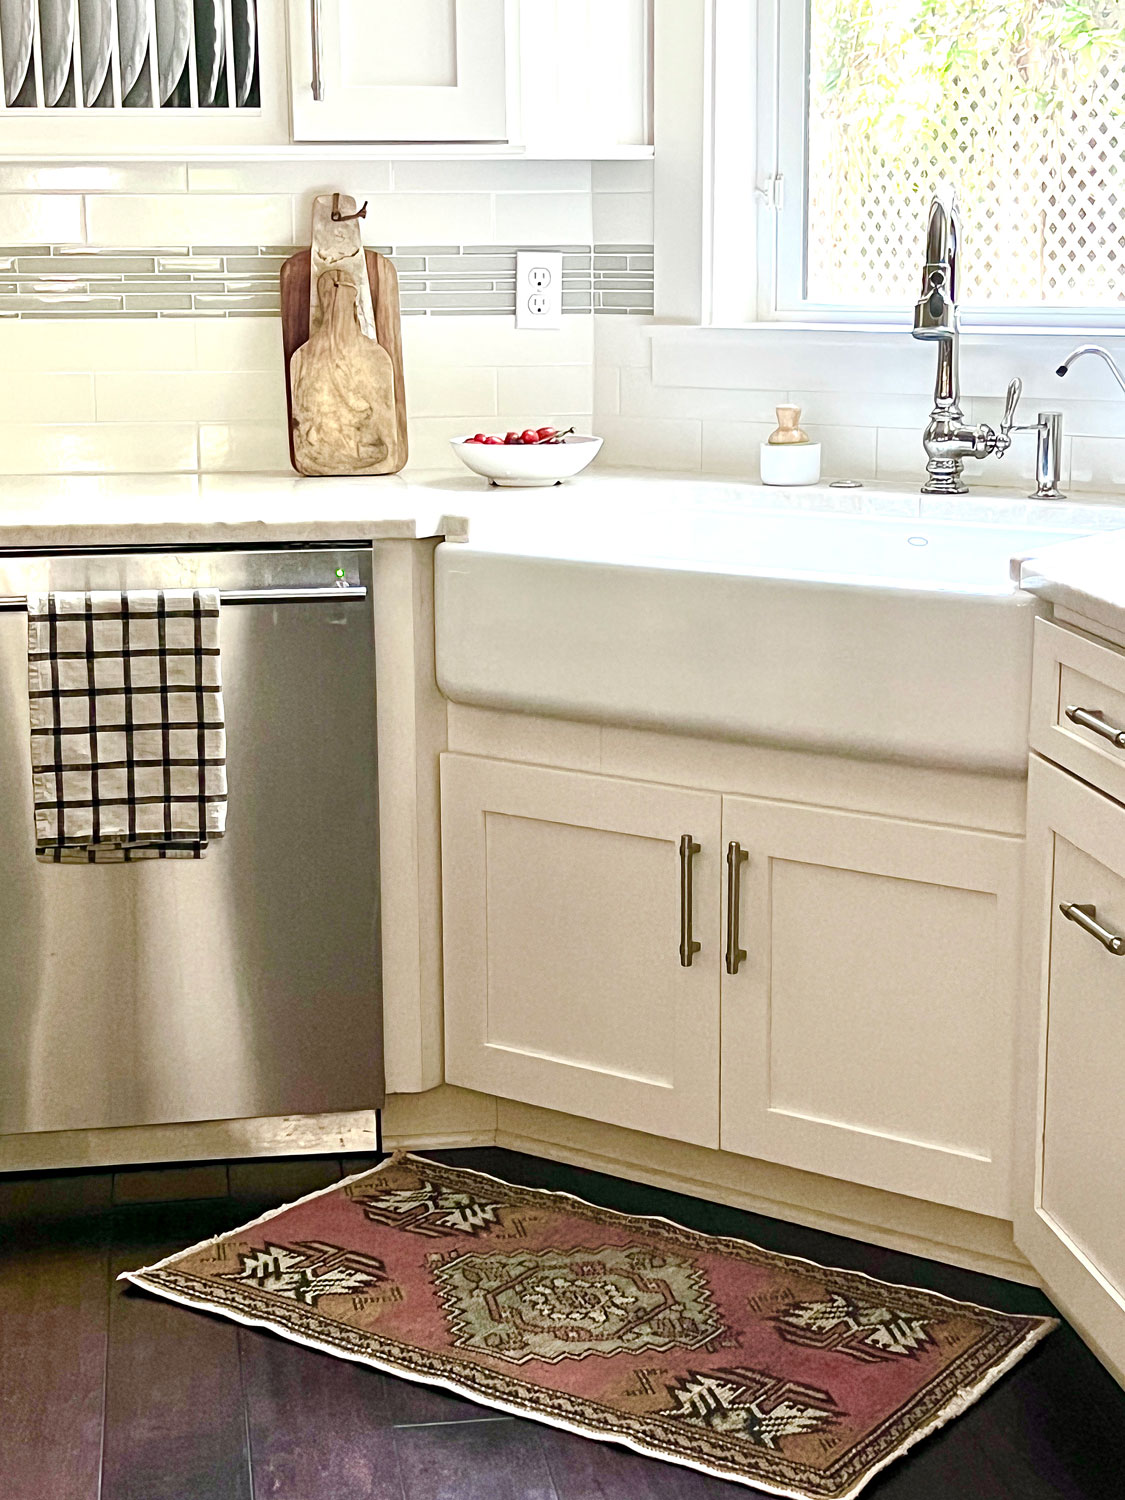 kitchen sink with plate rack and vintage rug